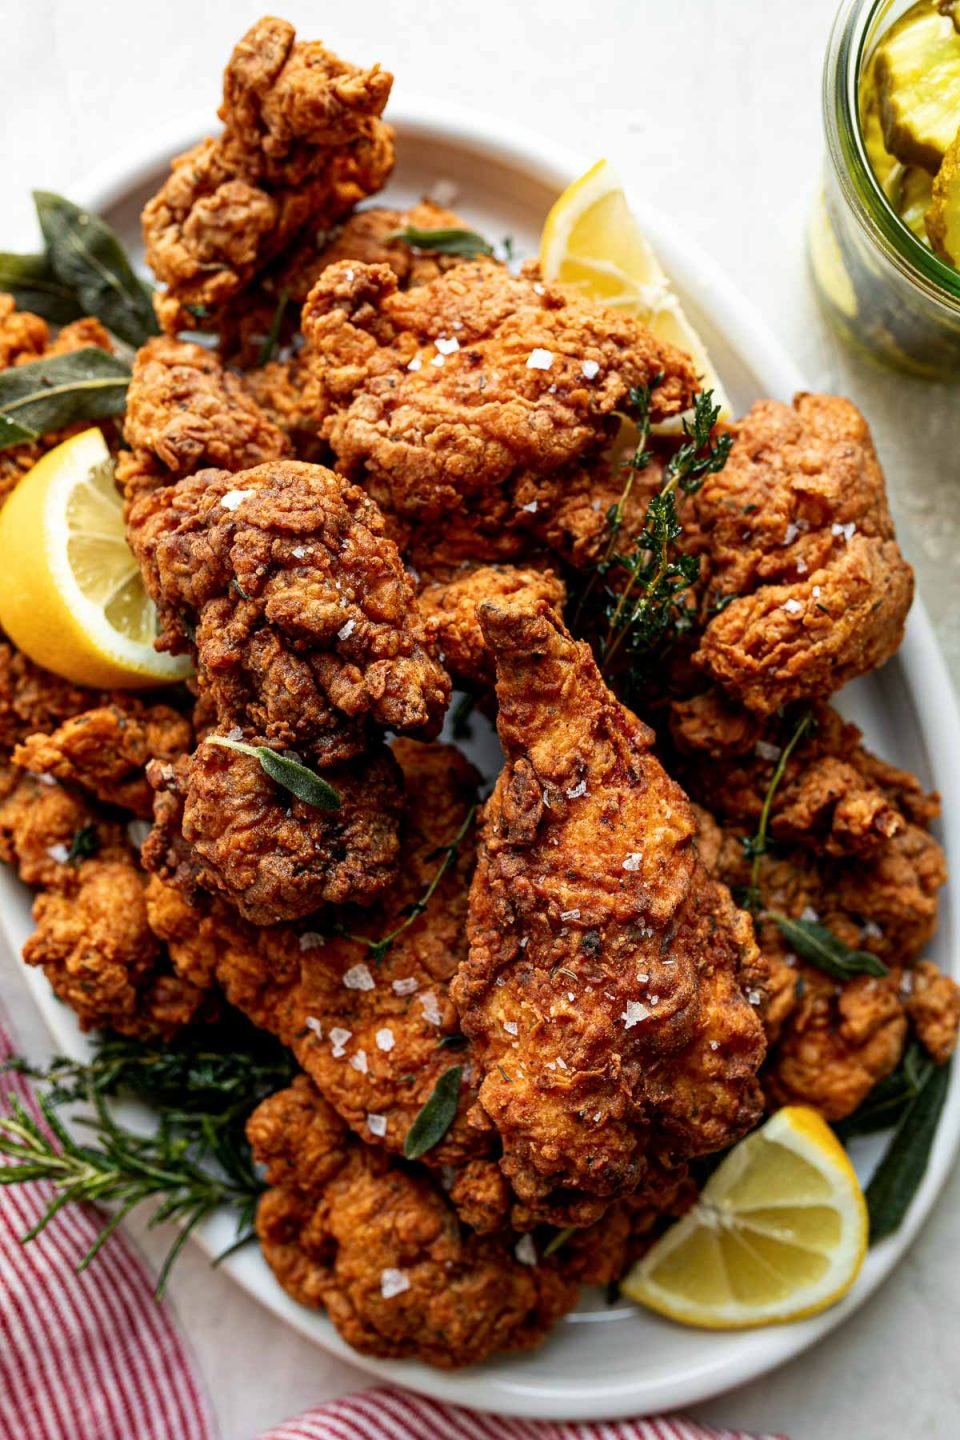 A top down shot of crispy, golden brown fried chicken is piled high on a white oval platter. Sprigs of herbs and slices of lemon are intertwined with the chicken. The platter sits on a white textured surface with a red & white striped linen napkin. A jar of pickles sits to the right of the platter.